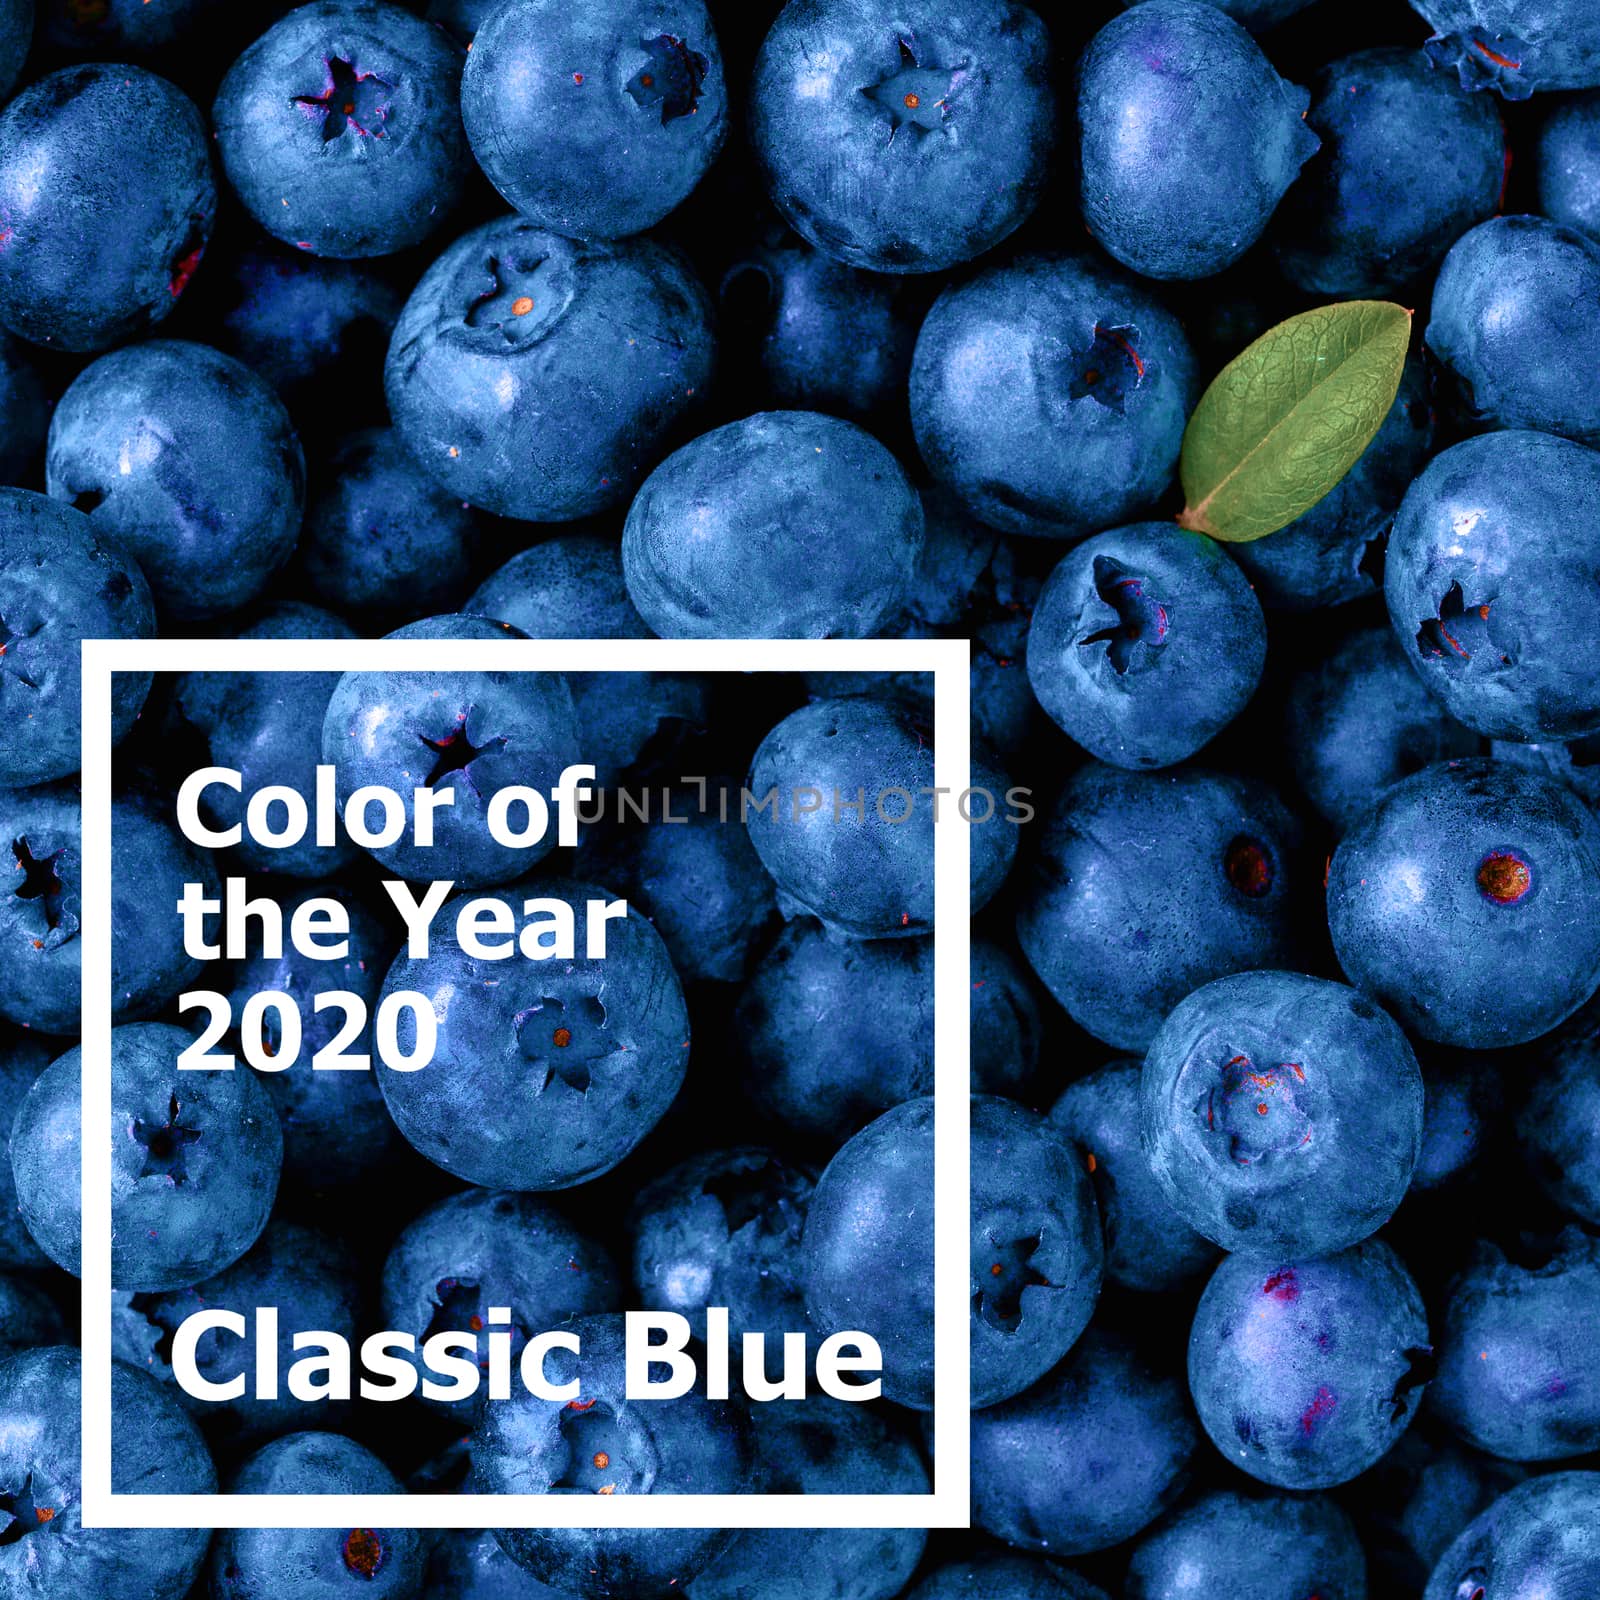 Blueberries in Color of Year 2020 Classic Blue by fascinadora